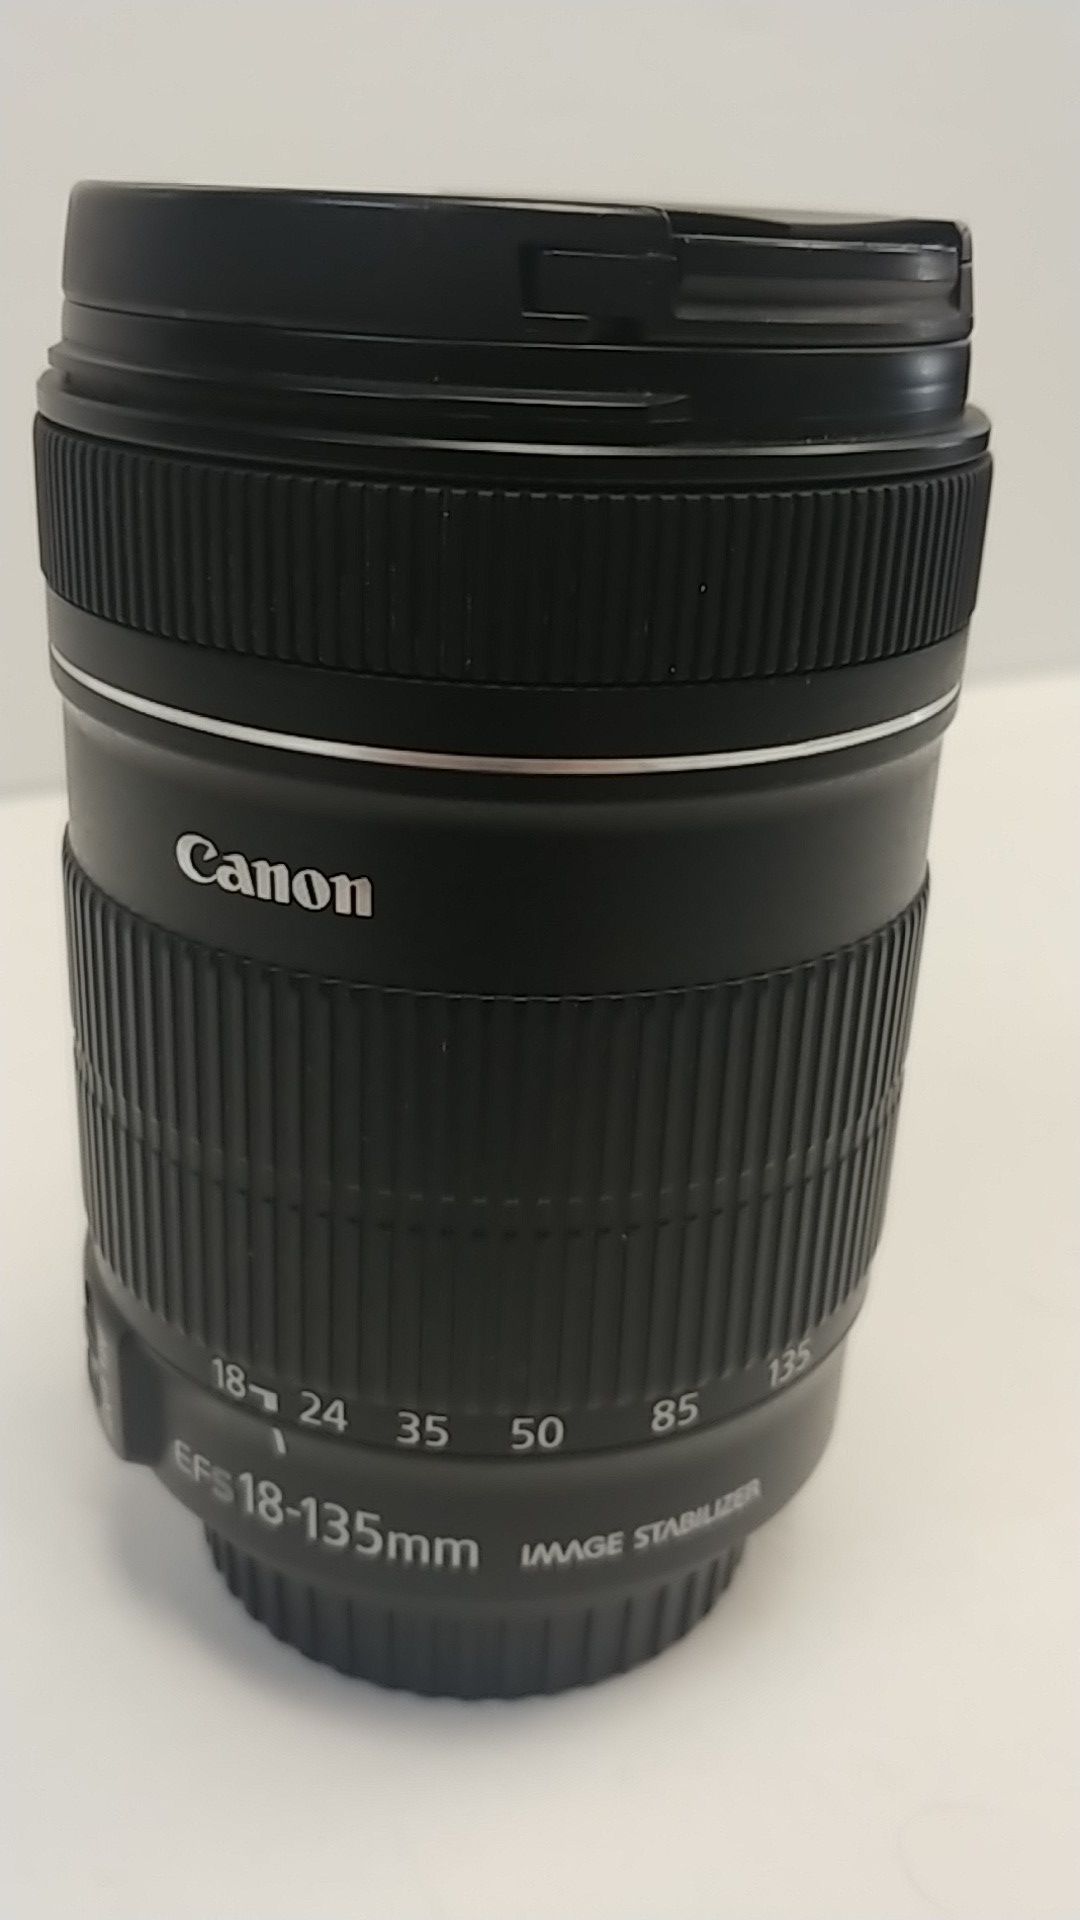 Canon lens ef-s 18-135mm f/3.5